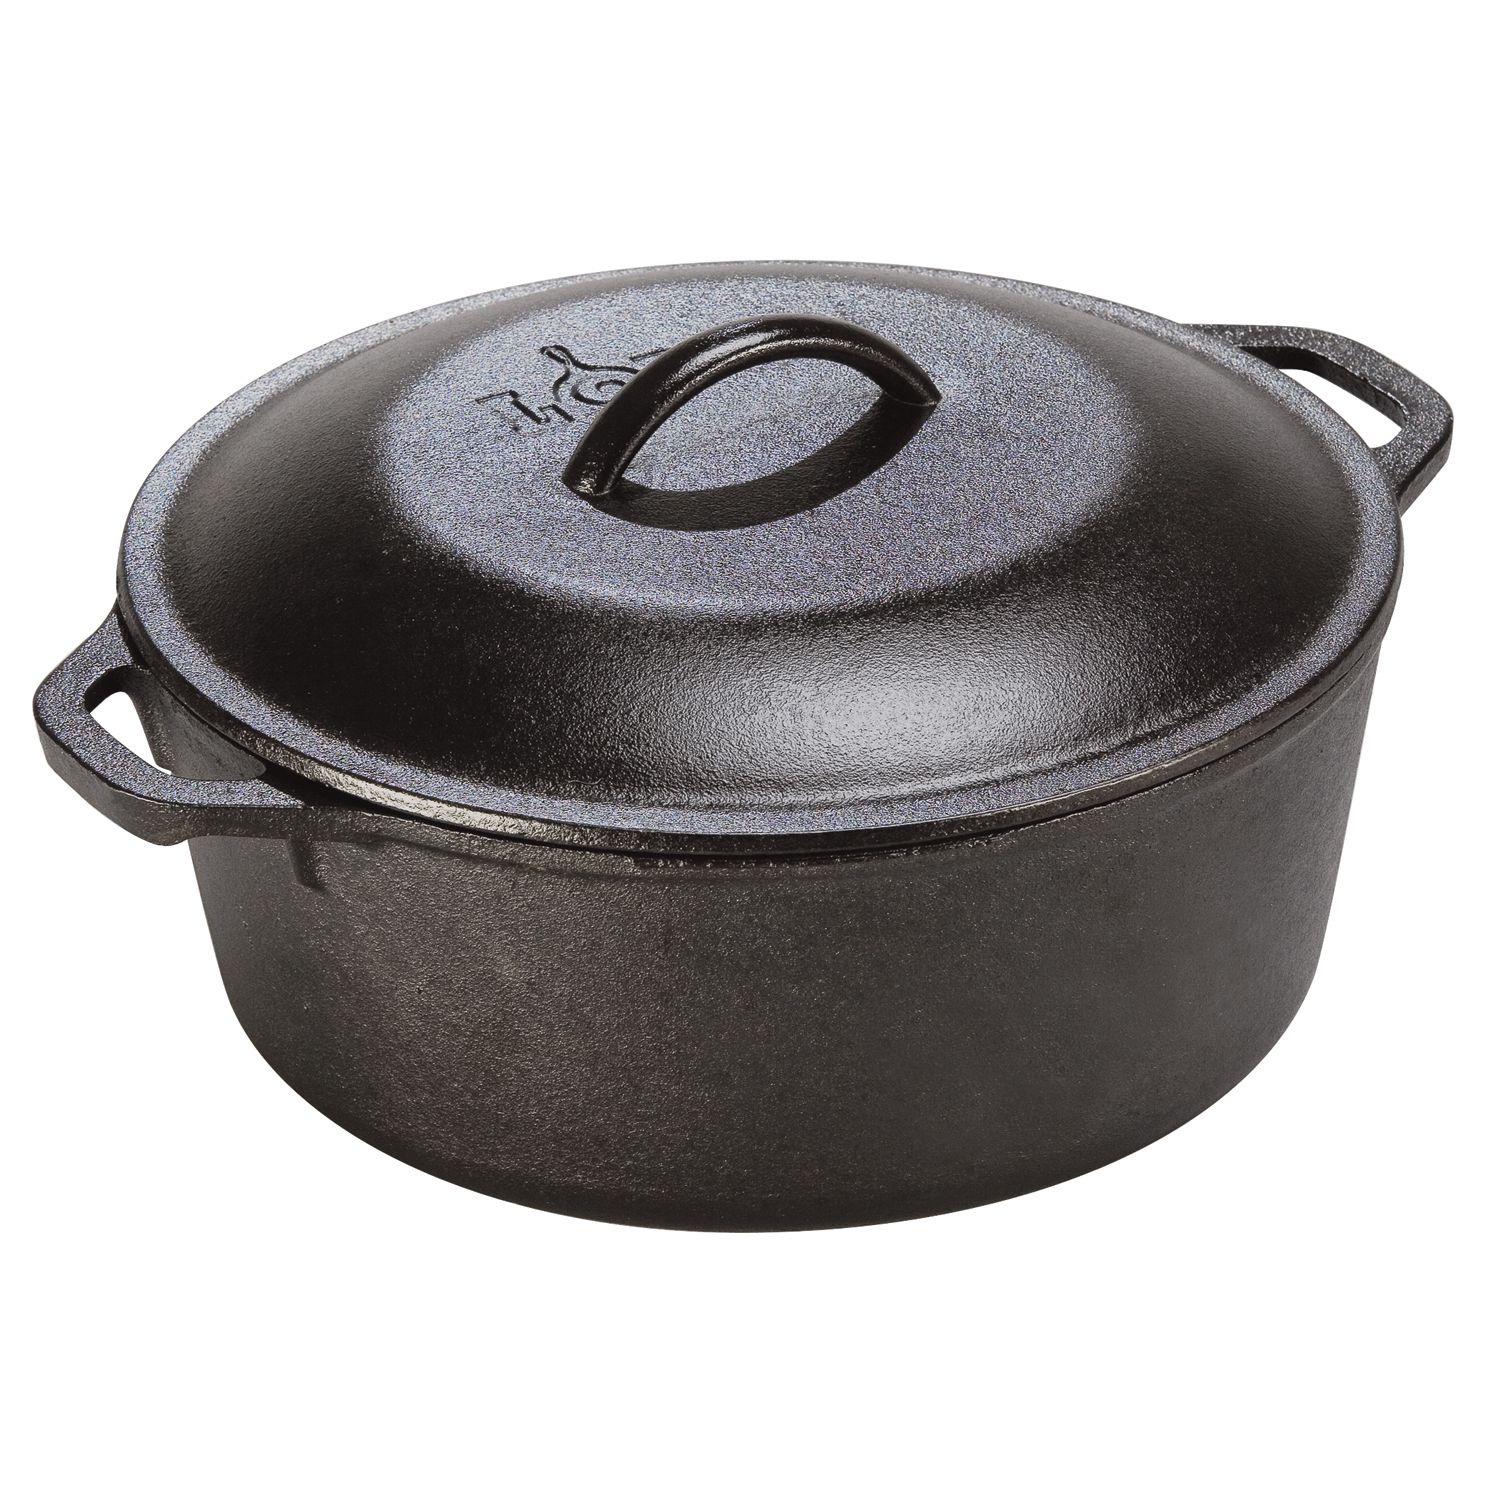 Lodge Pre-Seasoned 5 Quart Cast Iron Dutch Oven with Loop Handles and Cast Iron Cover - image 1 of 5